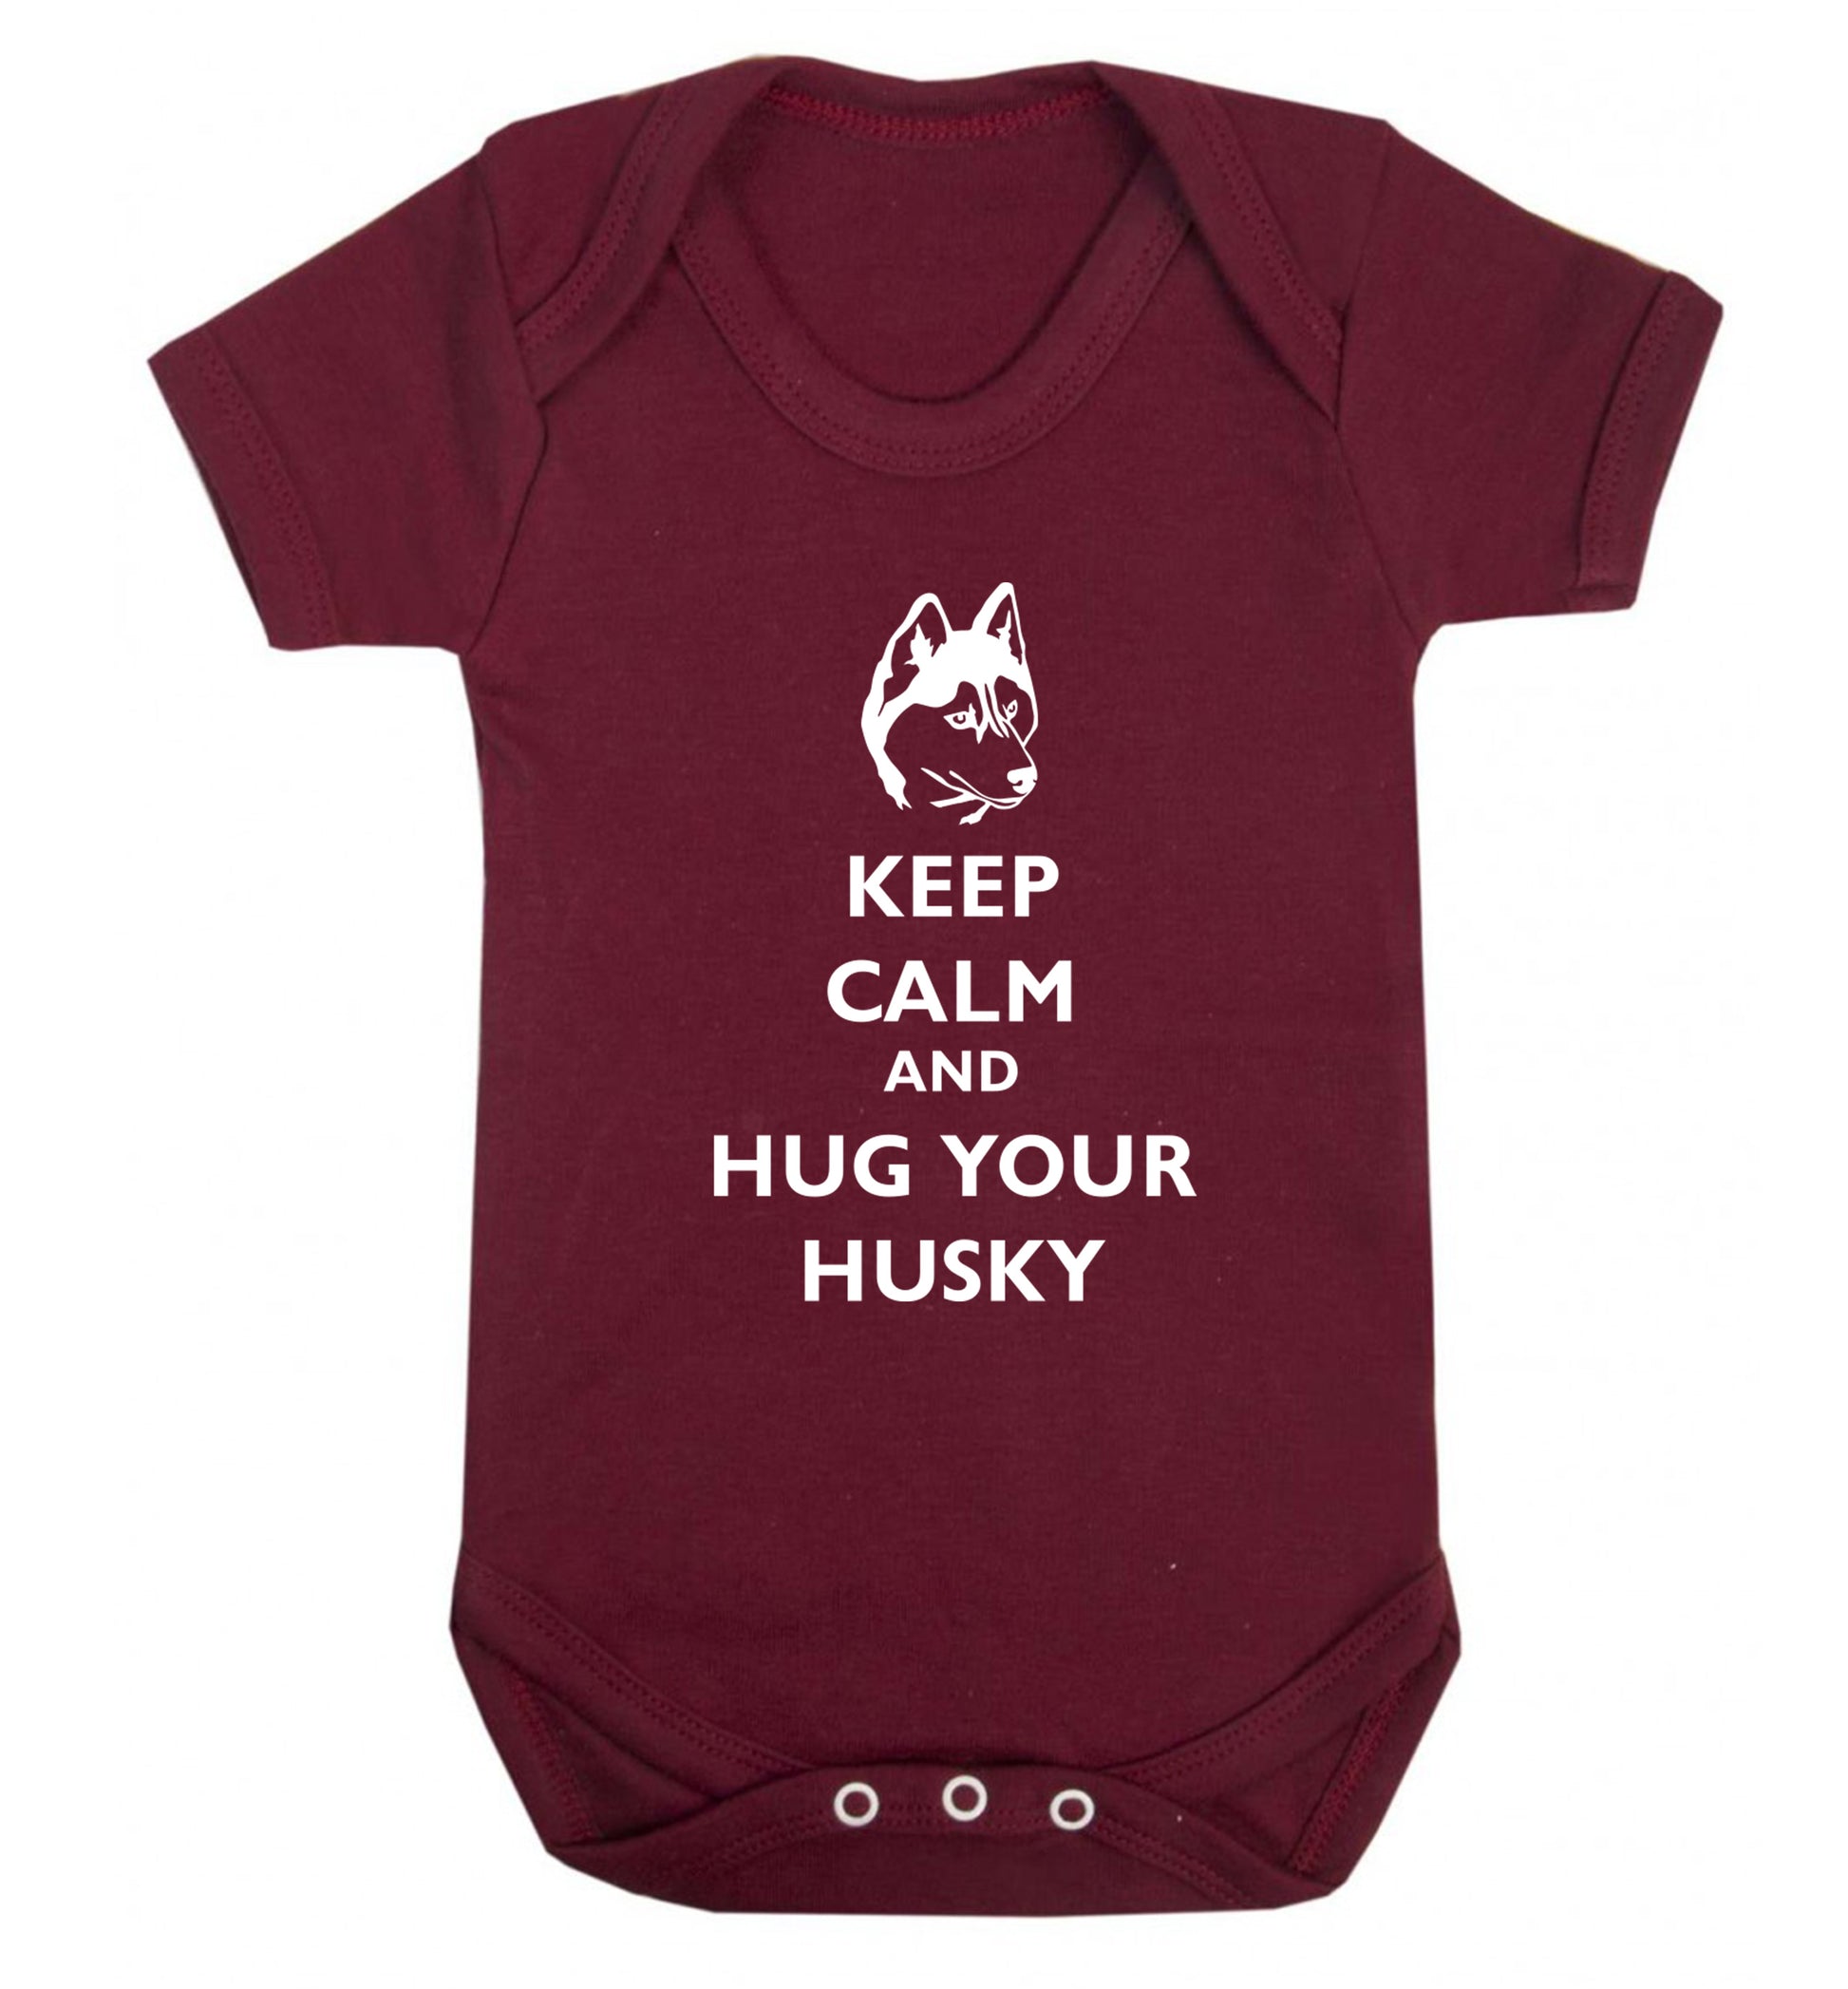 Keep calm and hug your husky Baby Vest maroon 18-24 months